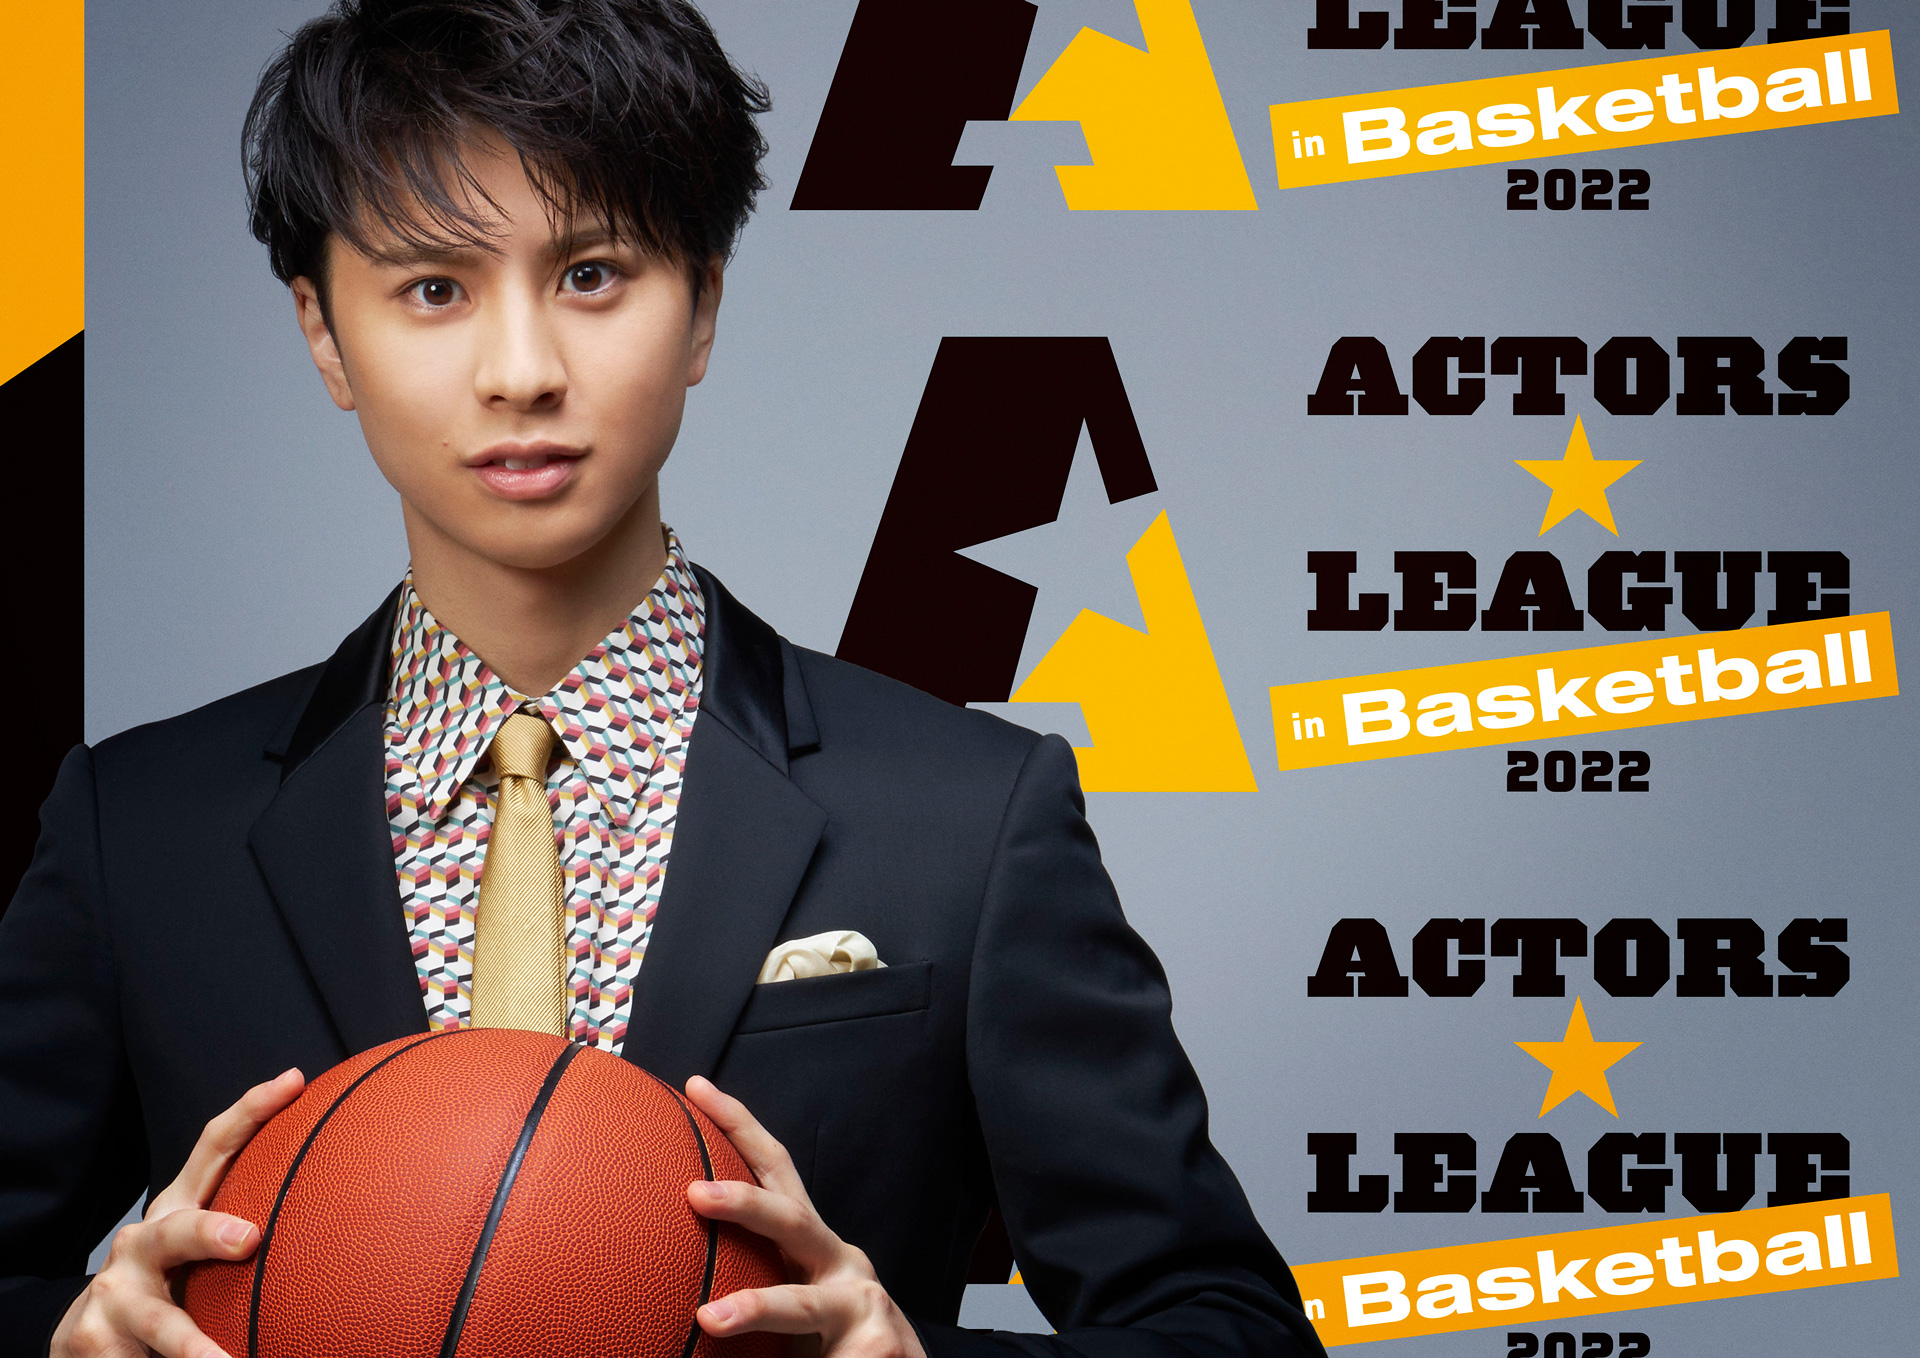 ACTORS LEAGUE in Basketball 2022 Blu-ray